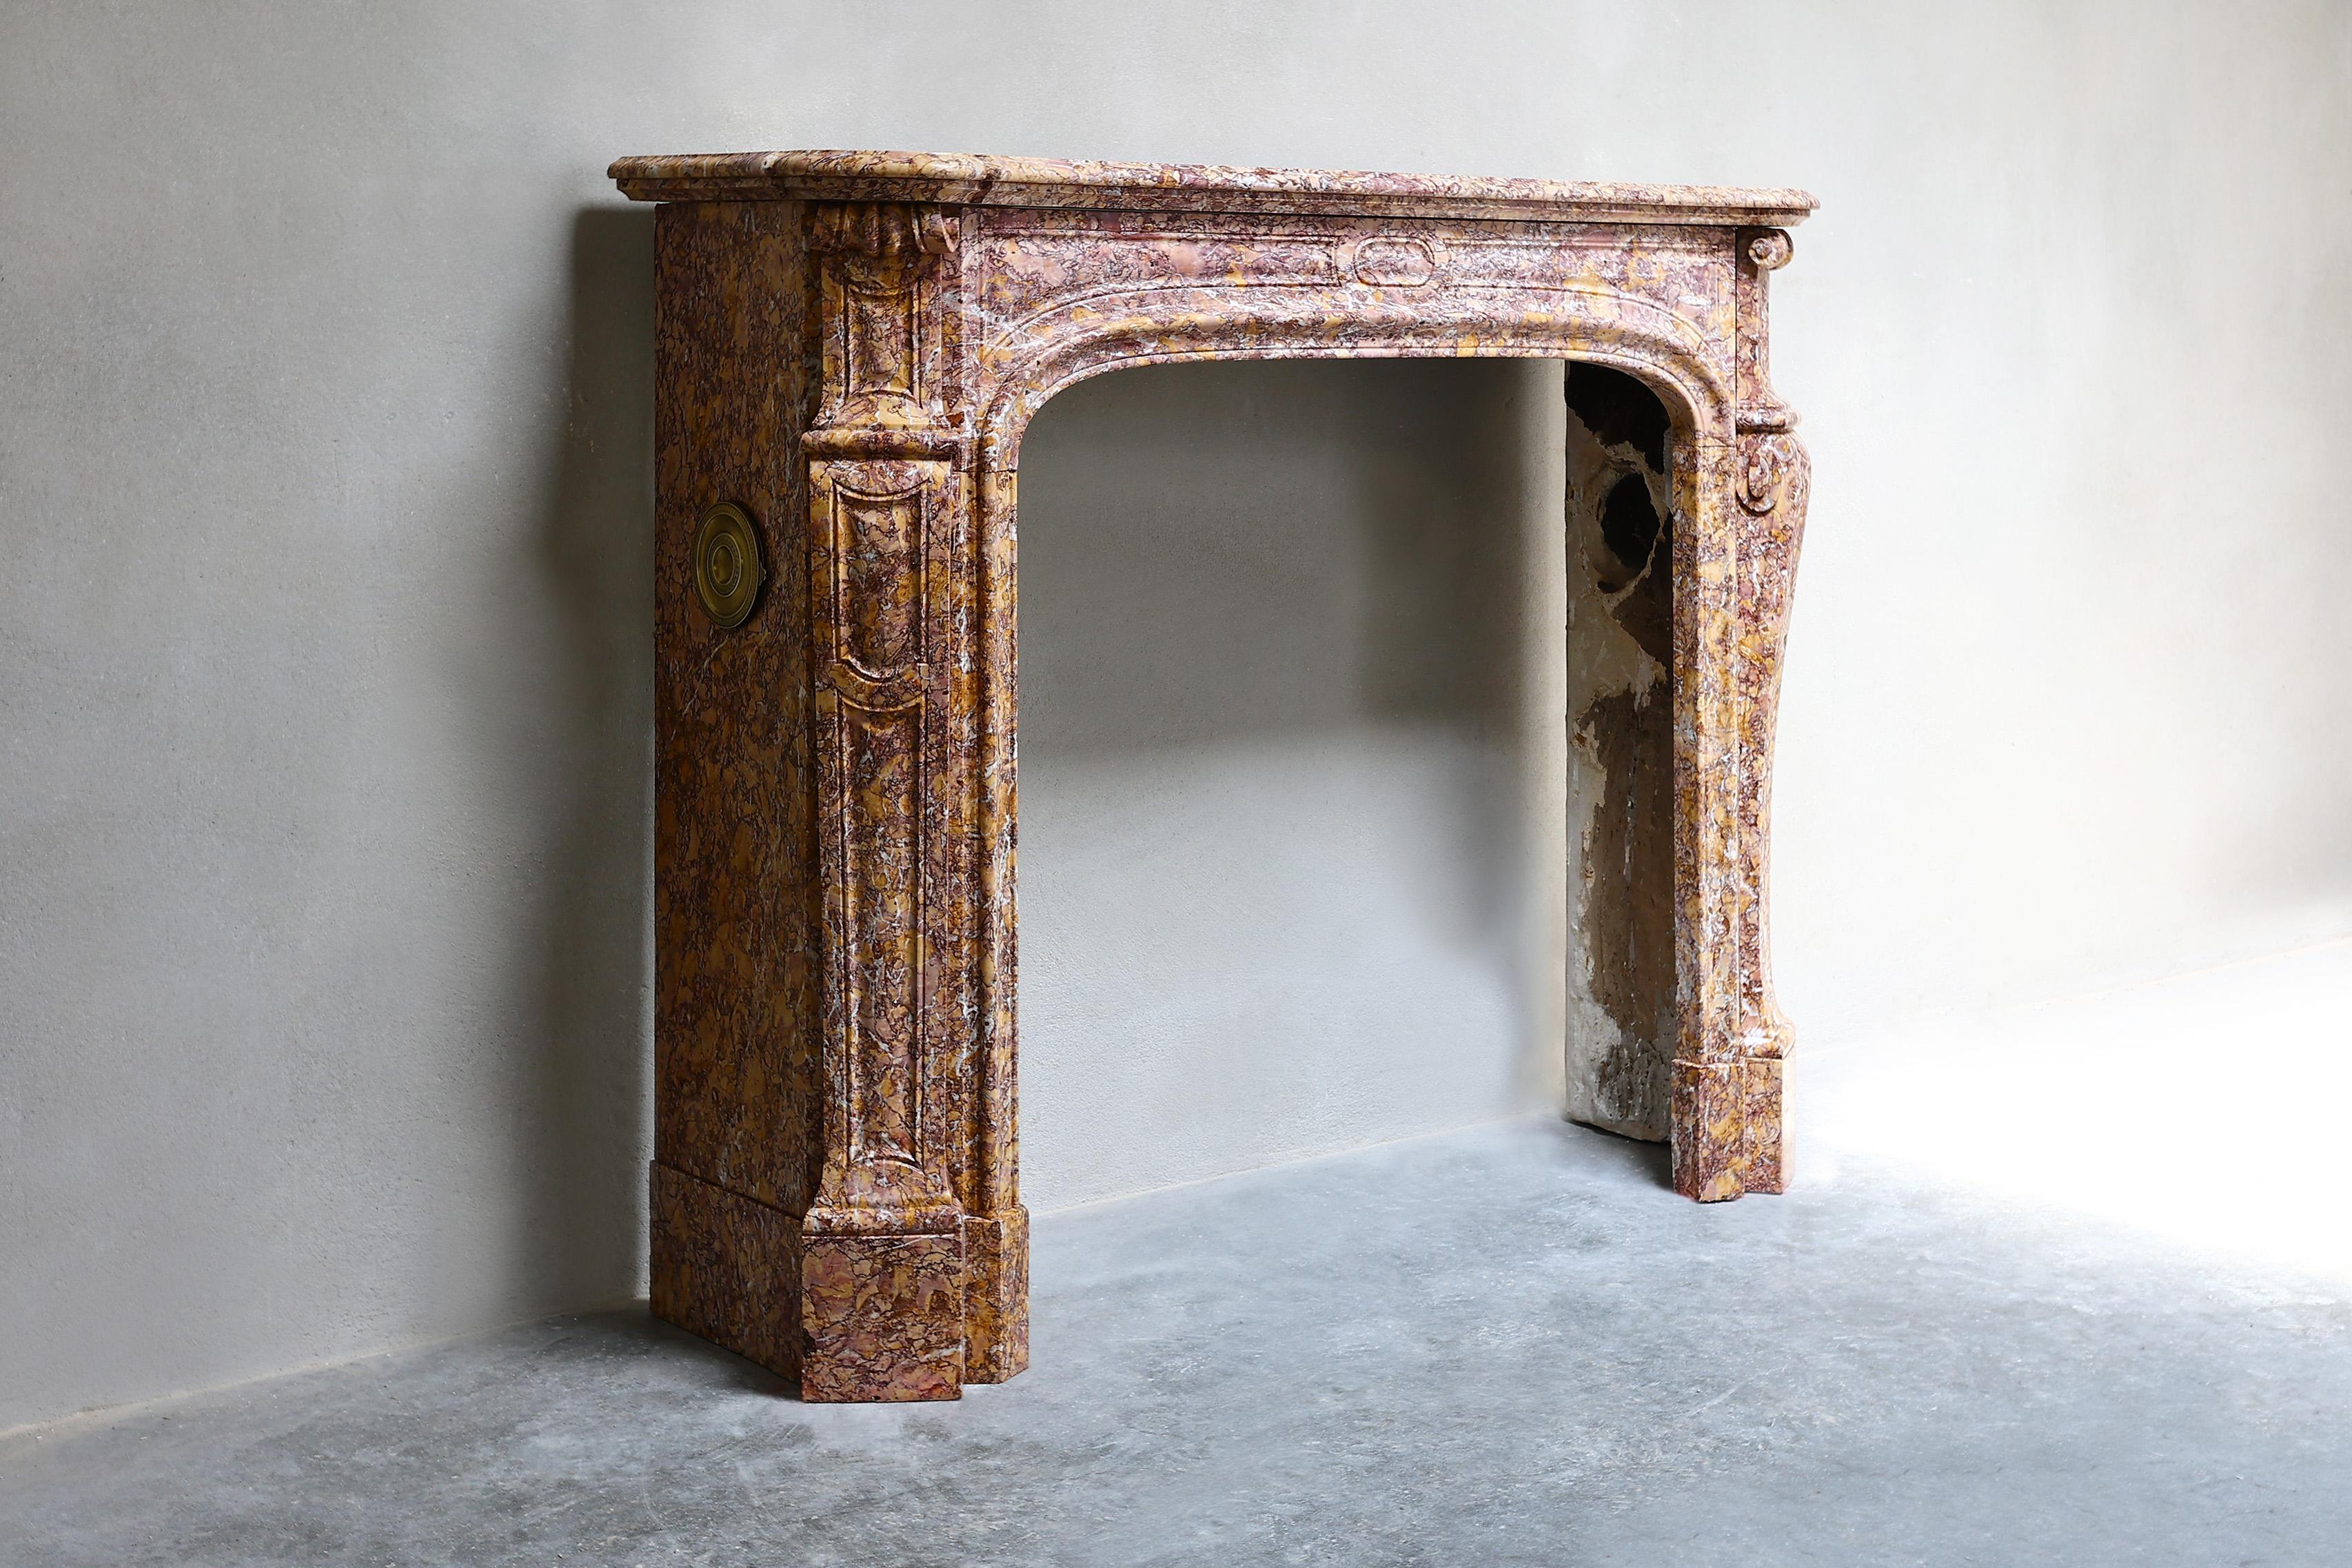 Special antique fireplace of the colorful marble type 'Brocatelle Violetta du Jura'. As the name suggests, this fireplace comes from the Jura, a beautiful region in France! This fireplace dates from the 19th century and is in the style of Louis XIV.